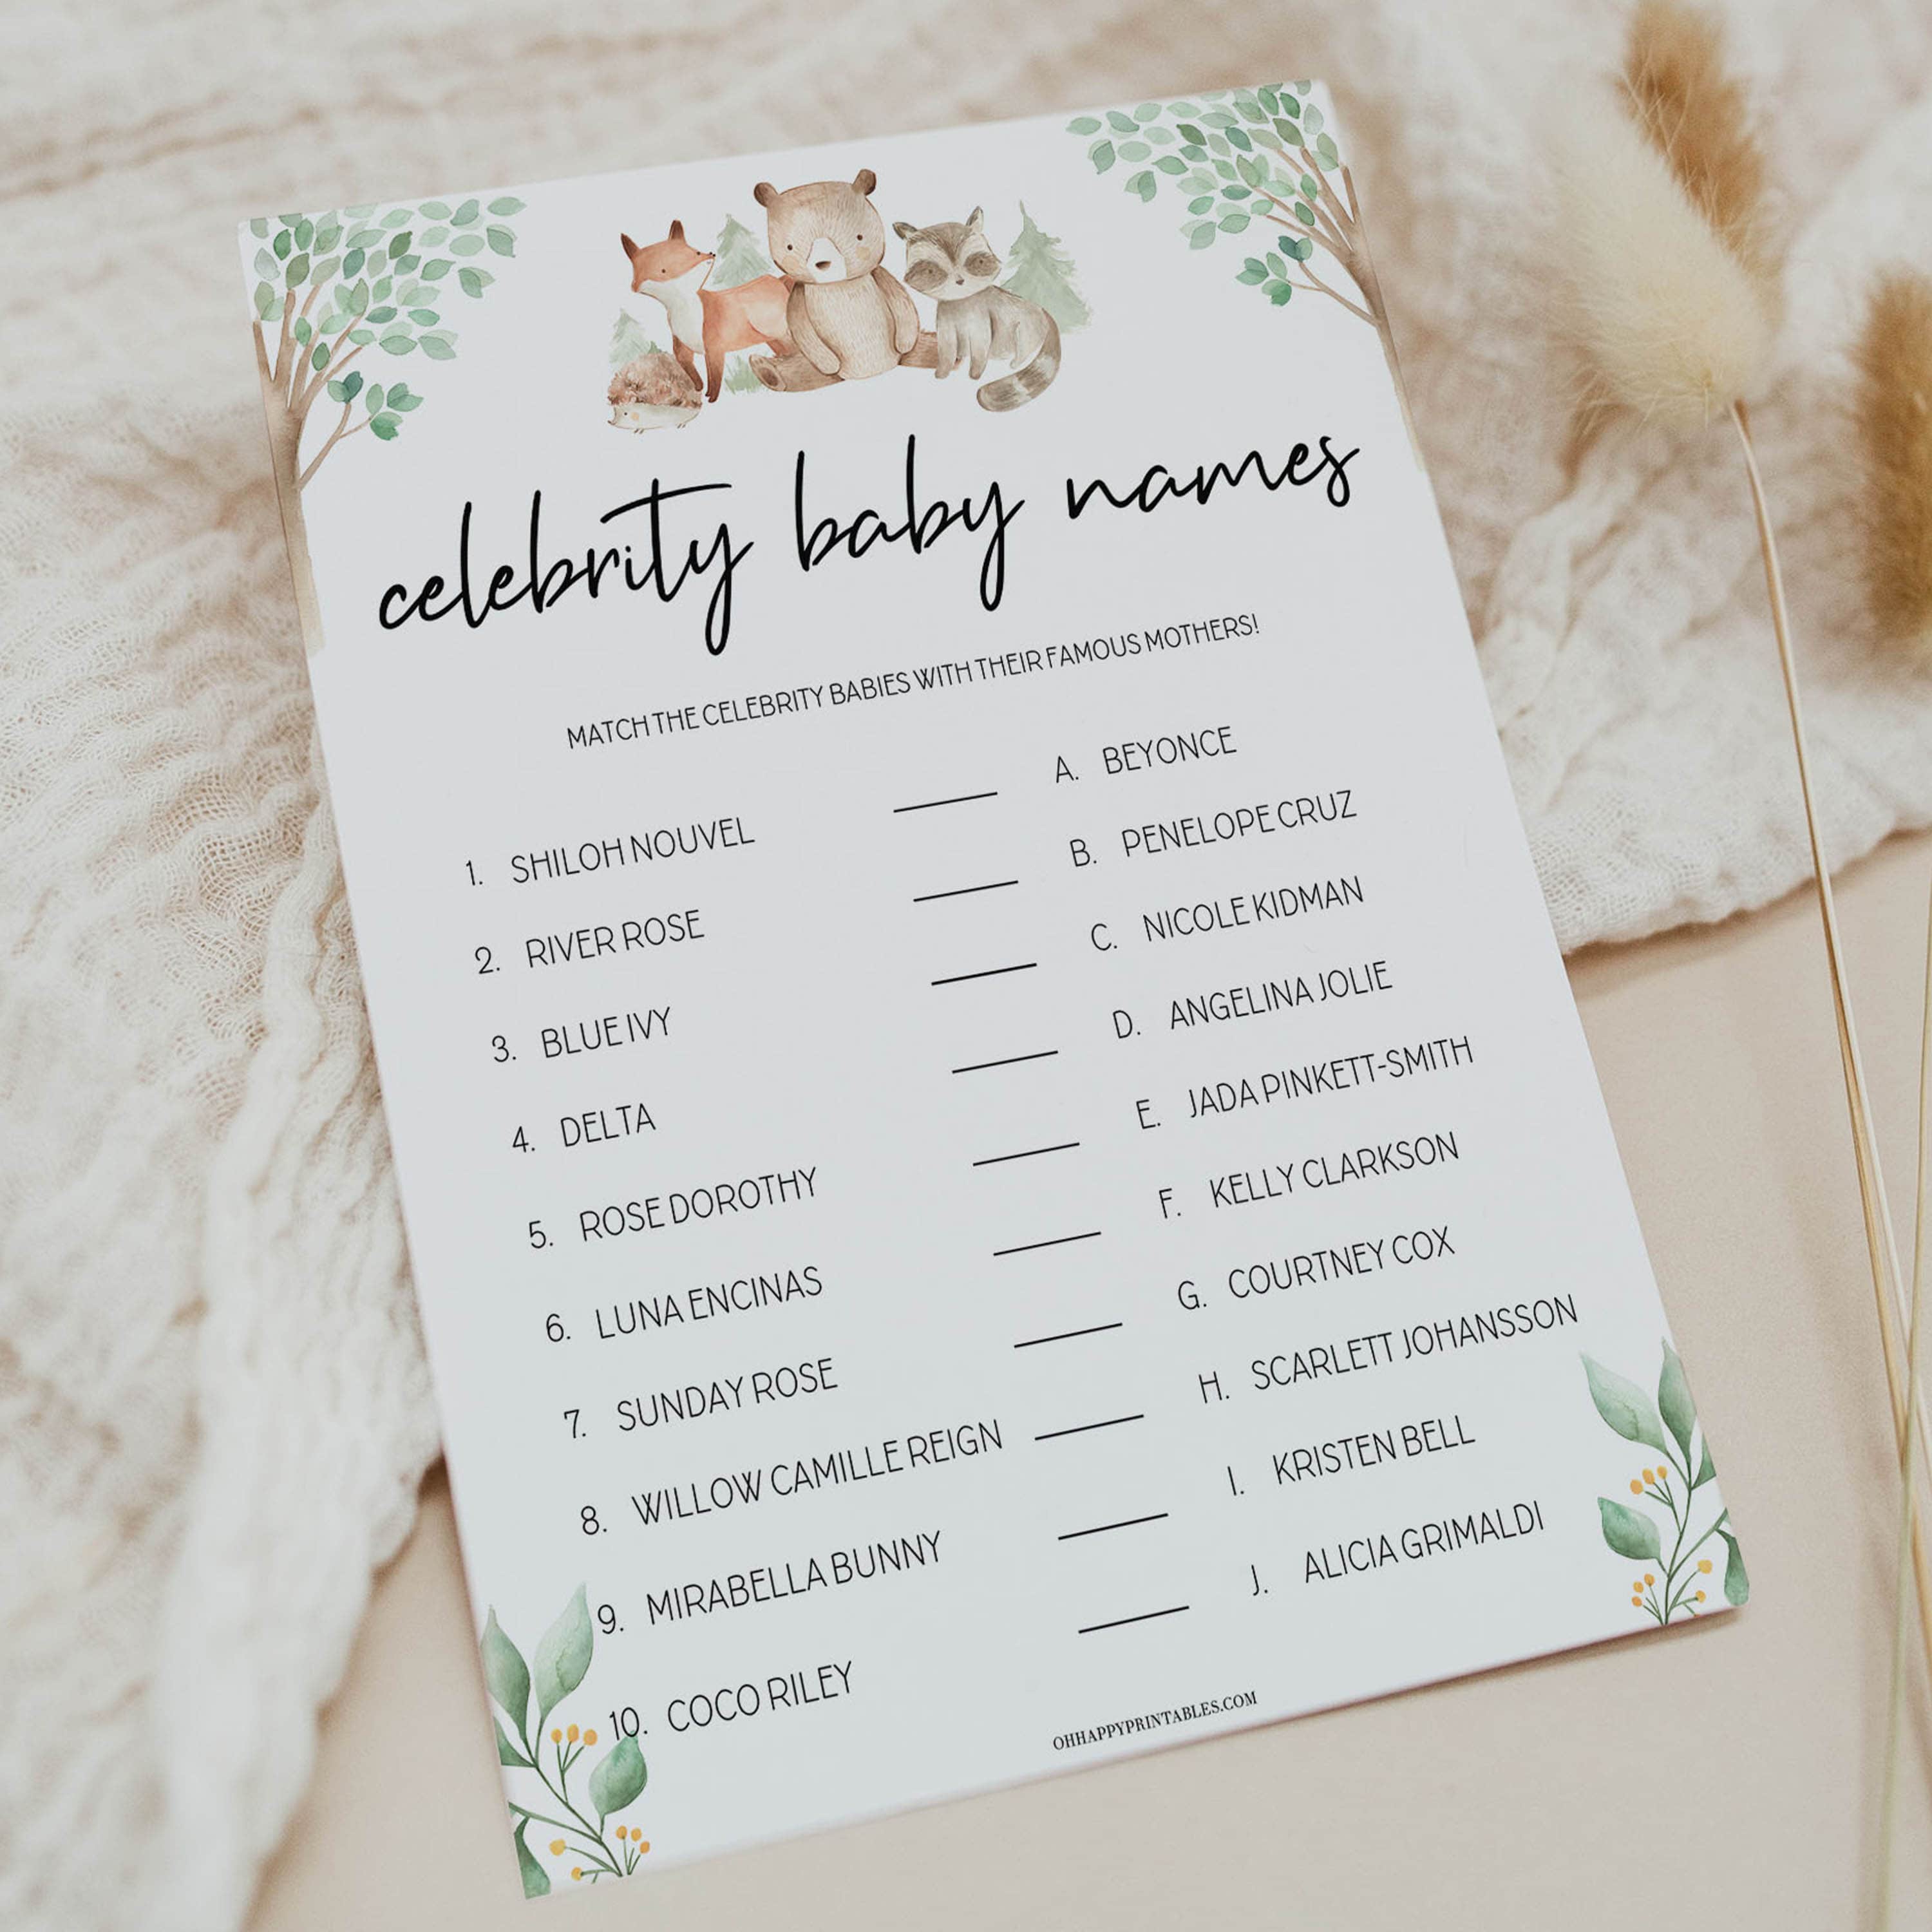 celebrity baby names game, Printable baby shower games, woodland animals baby games, baby shower games, fun baby shower ideas, top baby shower ideas, woodland baby shower, baby shower games, fun woodland animals baby shower ideas